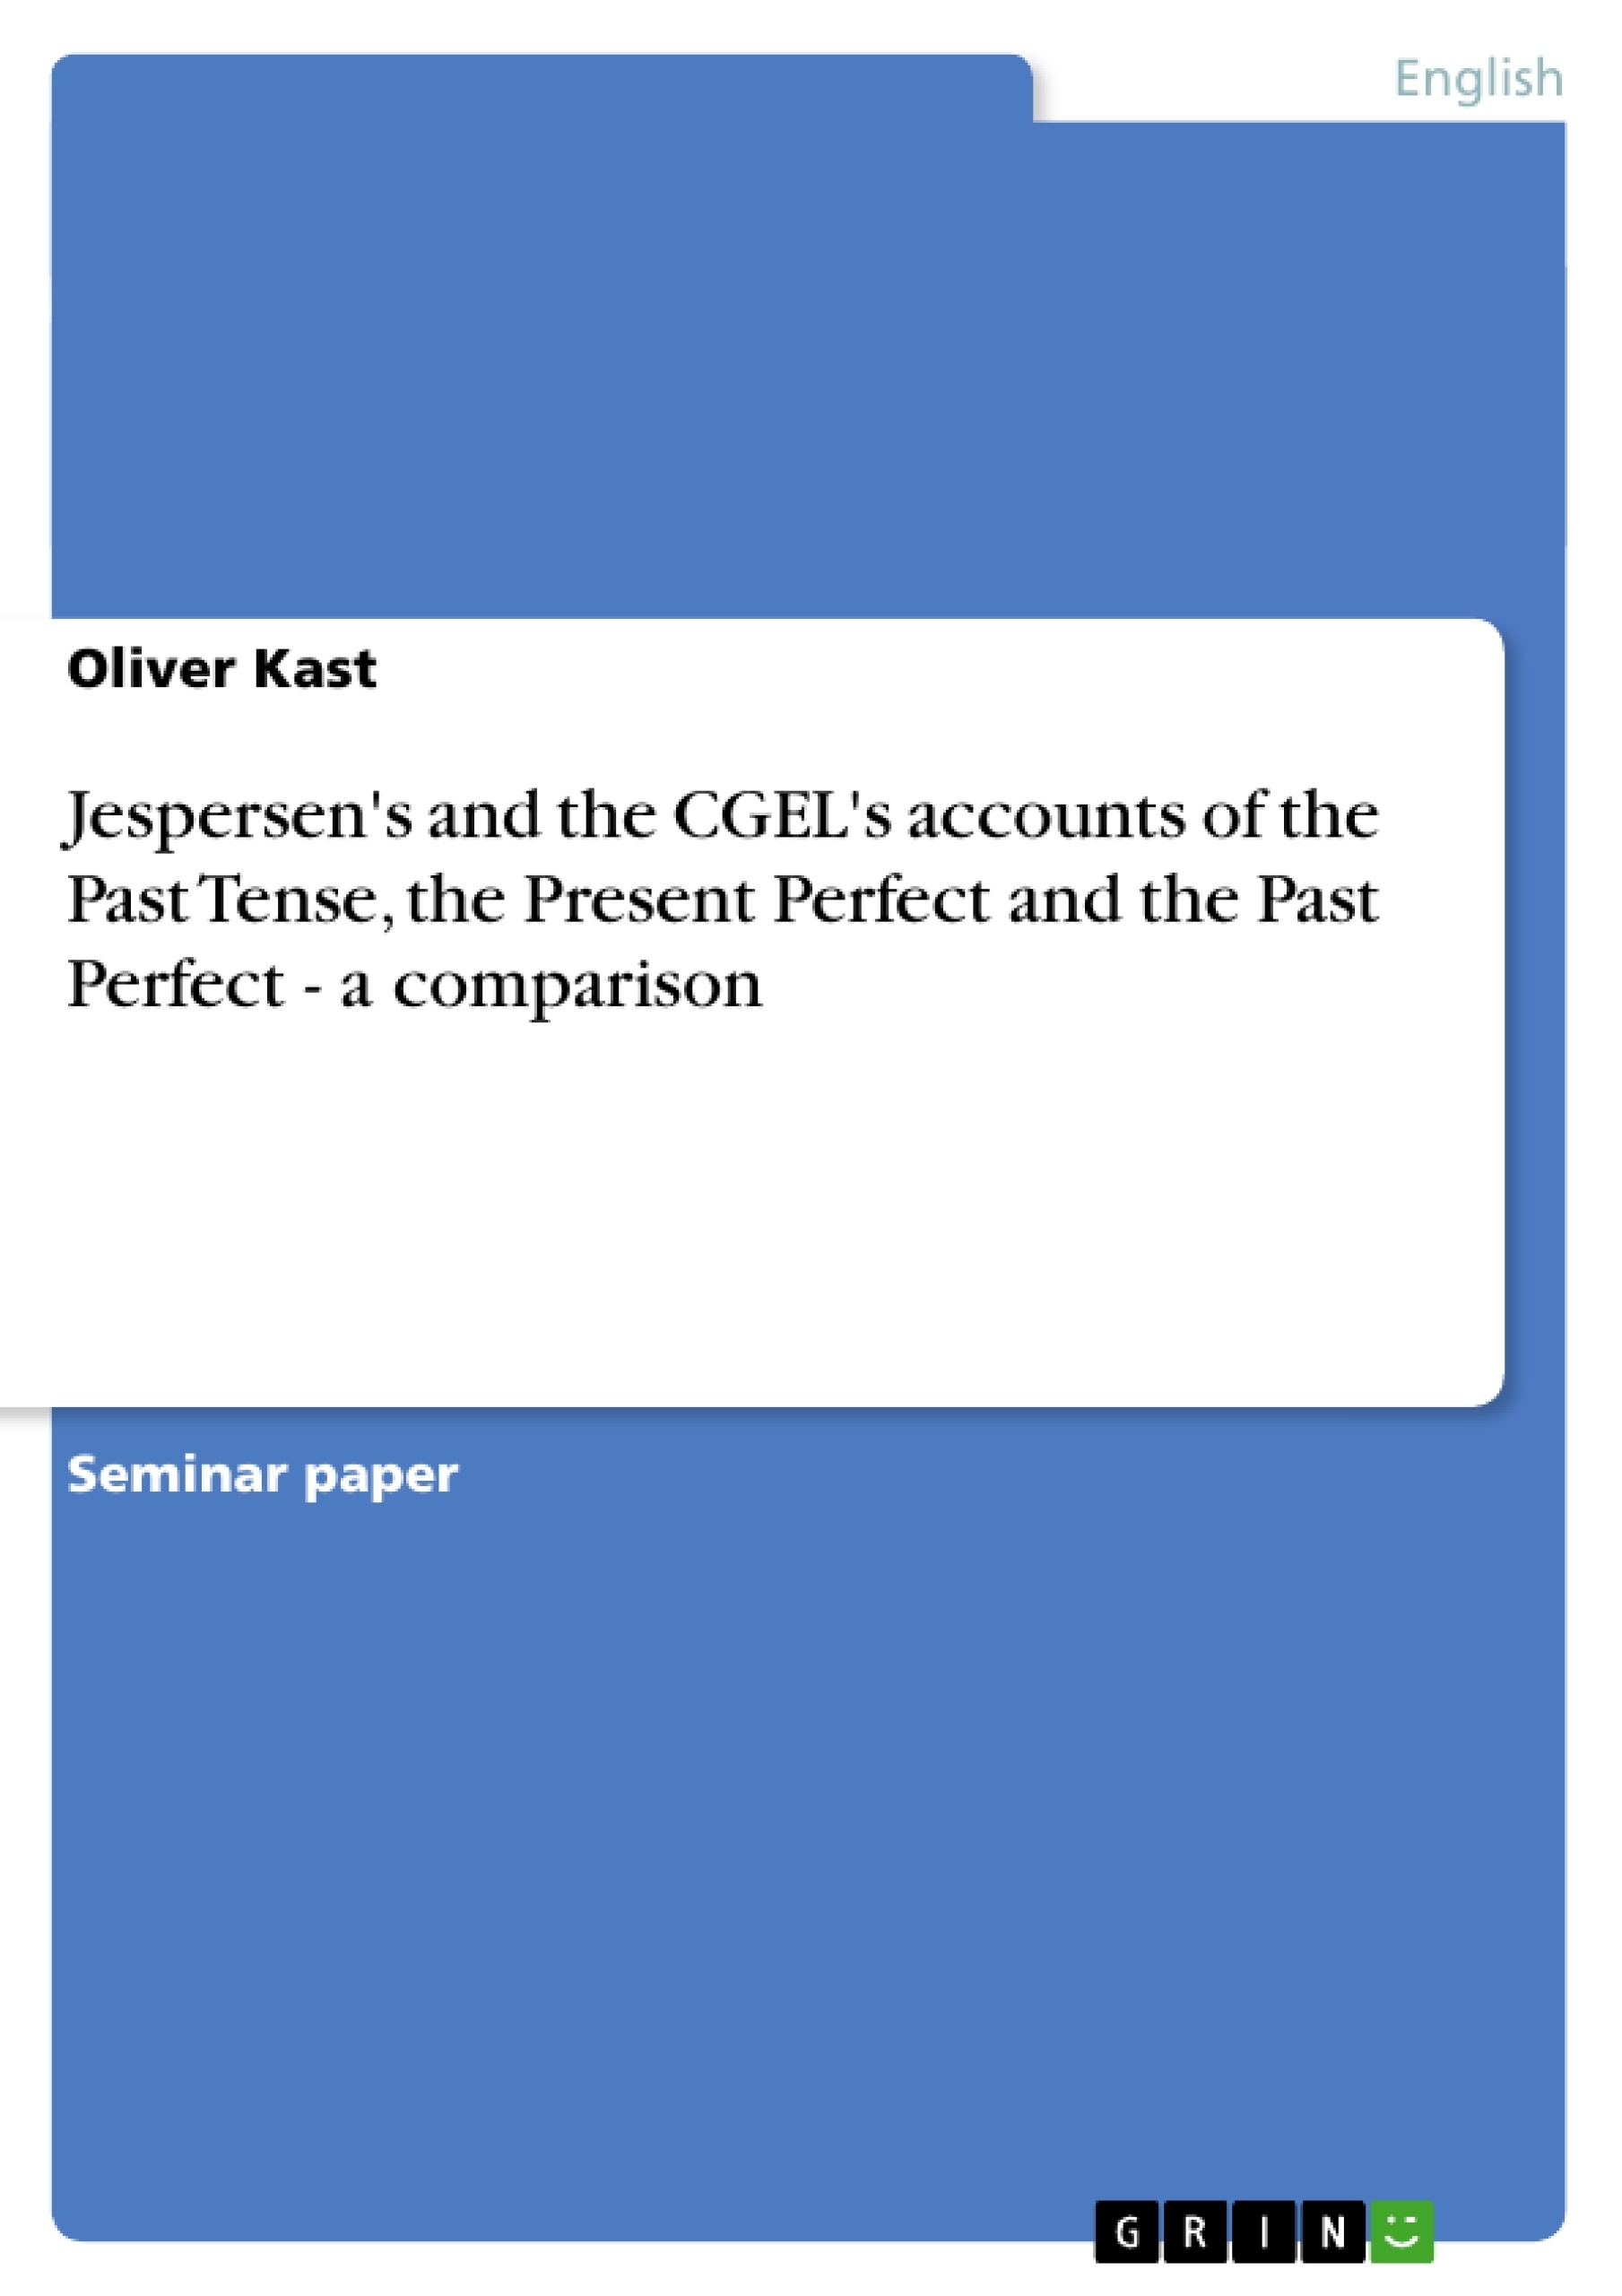 Title: Jespersen's and the CGEL's accounts of the Past Tense, the Present Perfect and the Past Perfect - a comparison